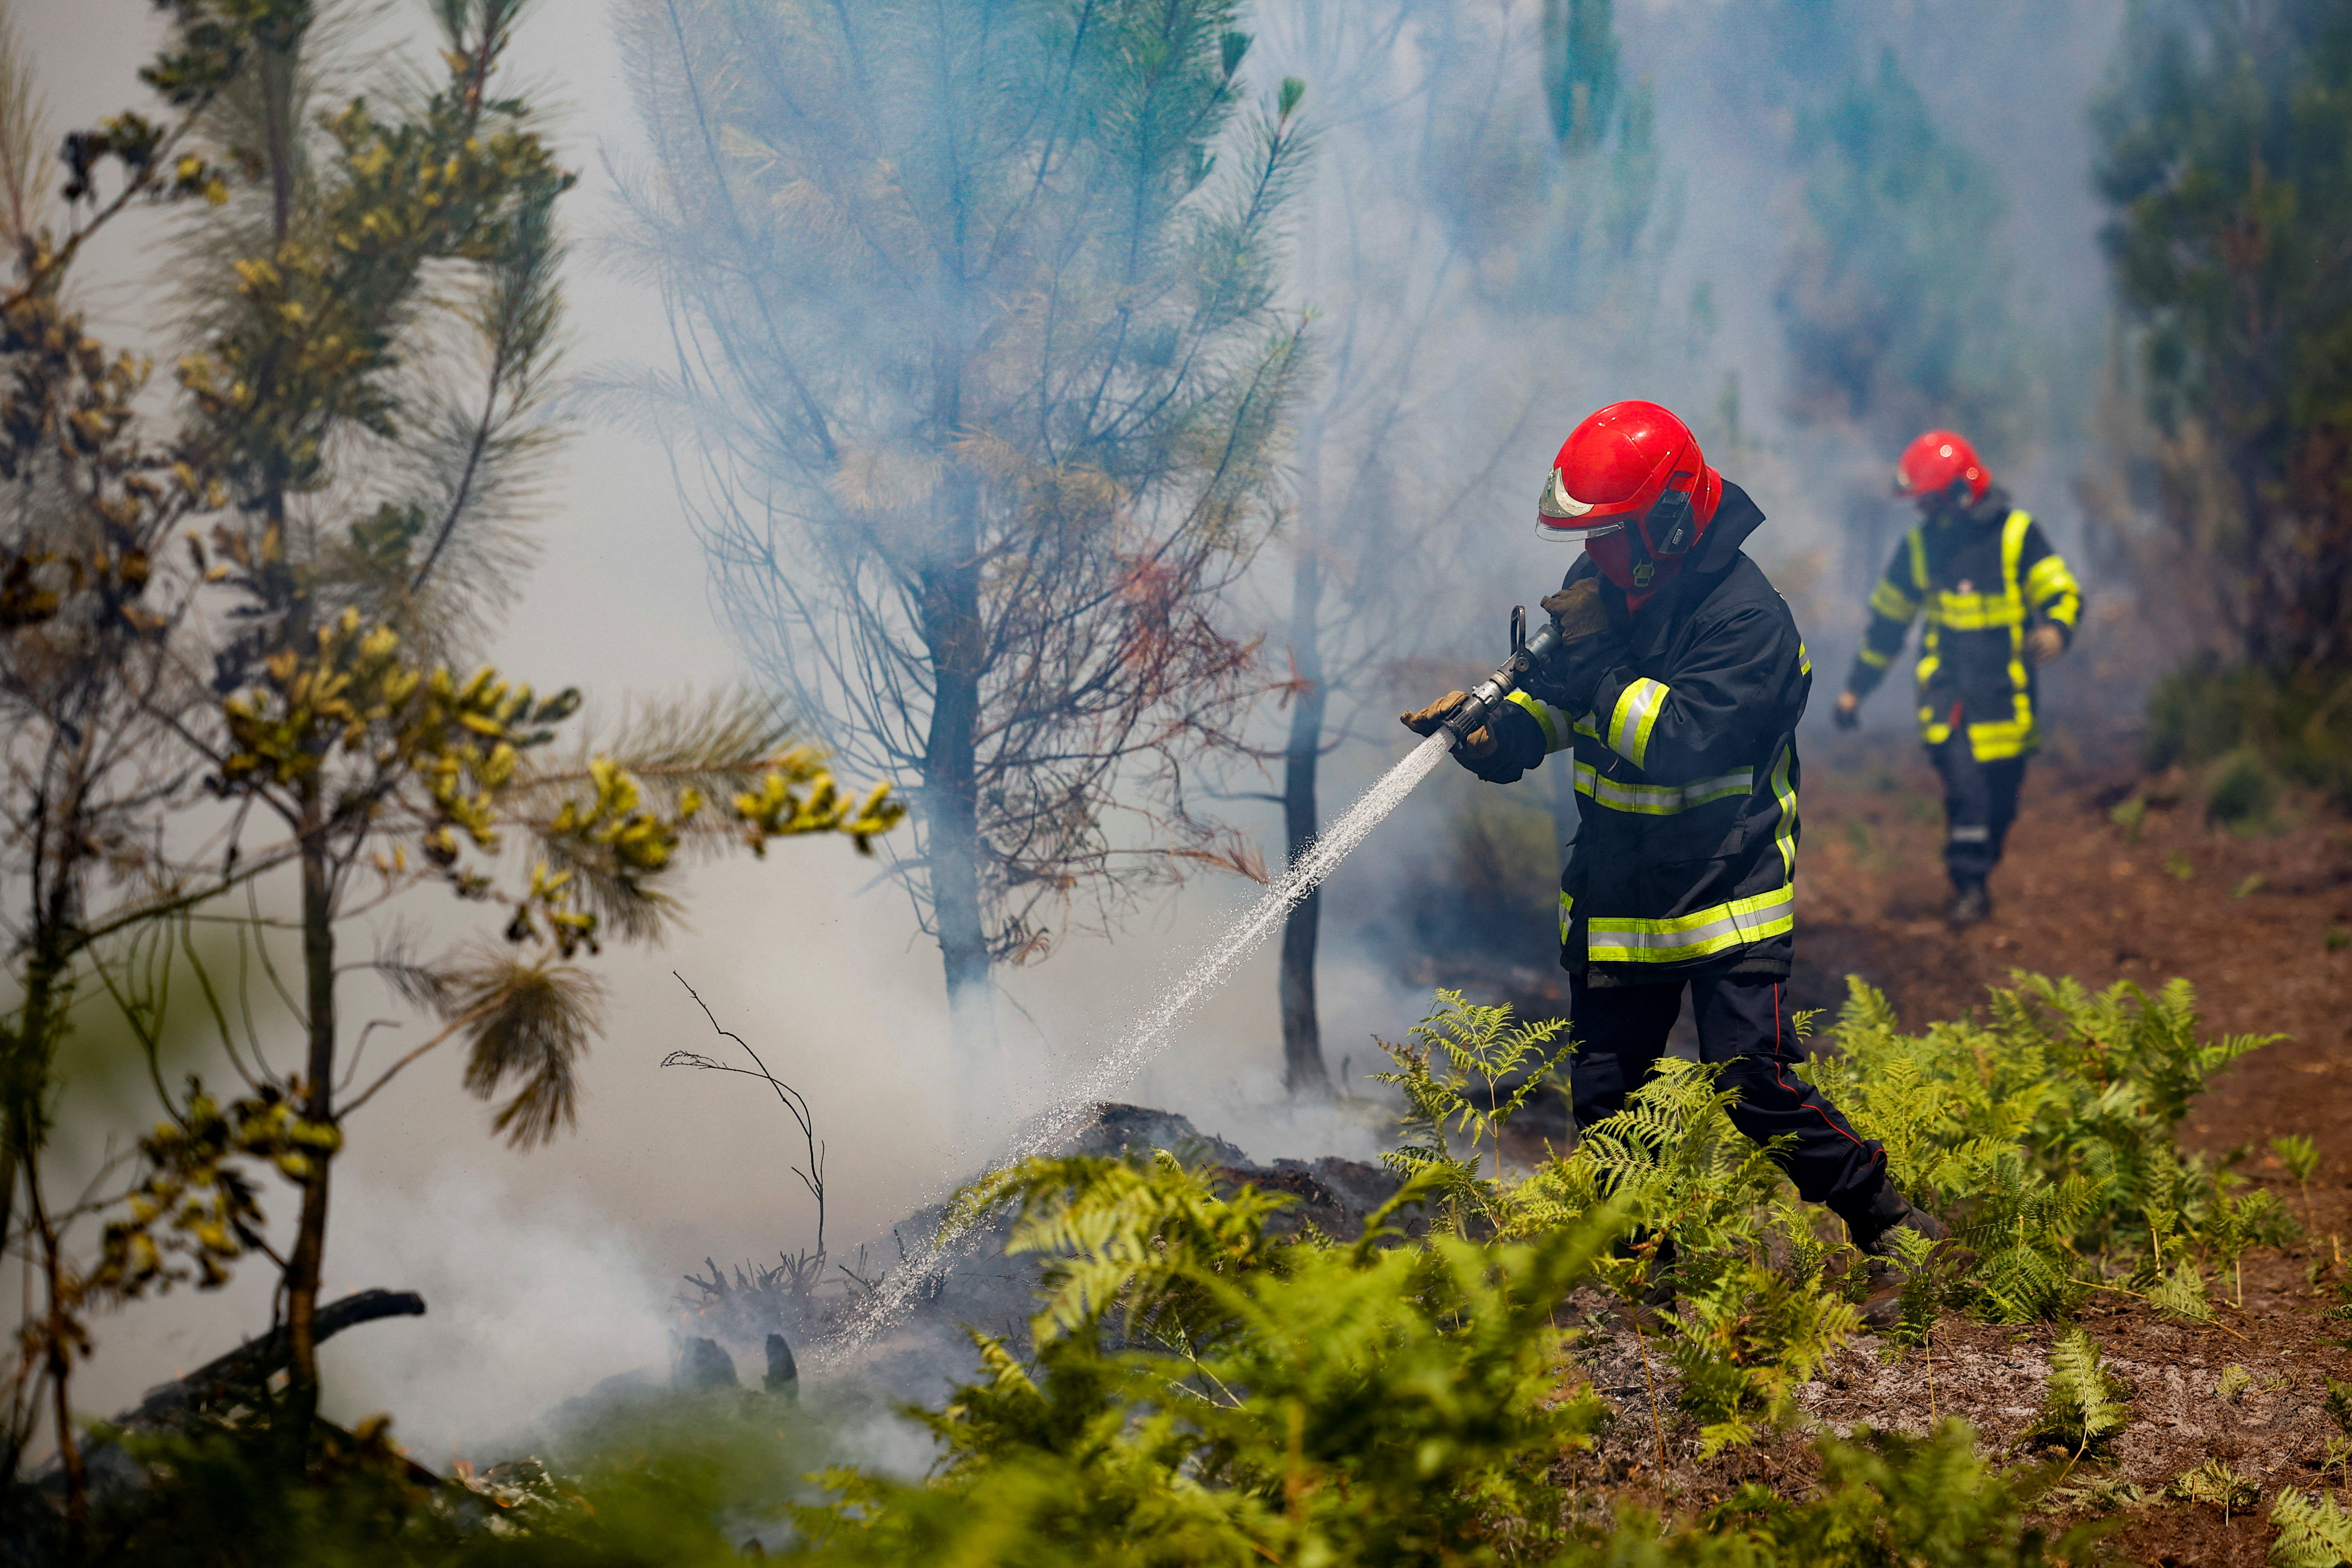 Wildfires in southwestern France